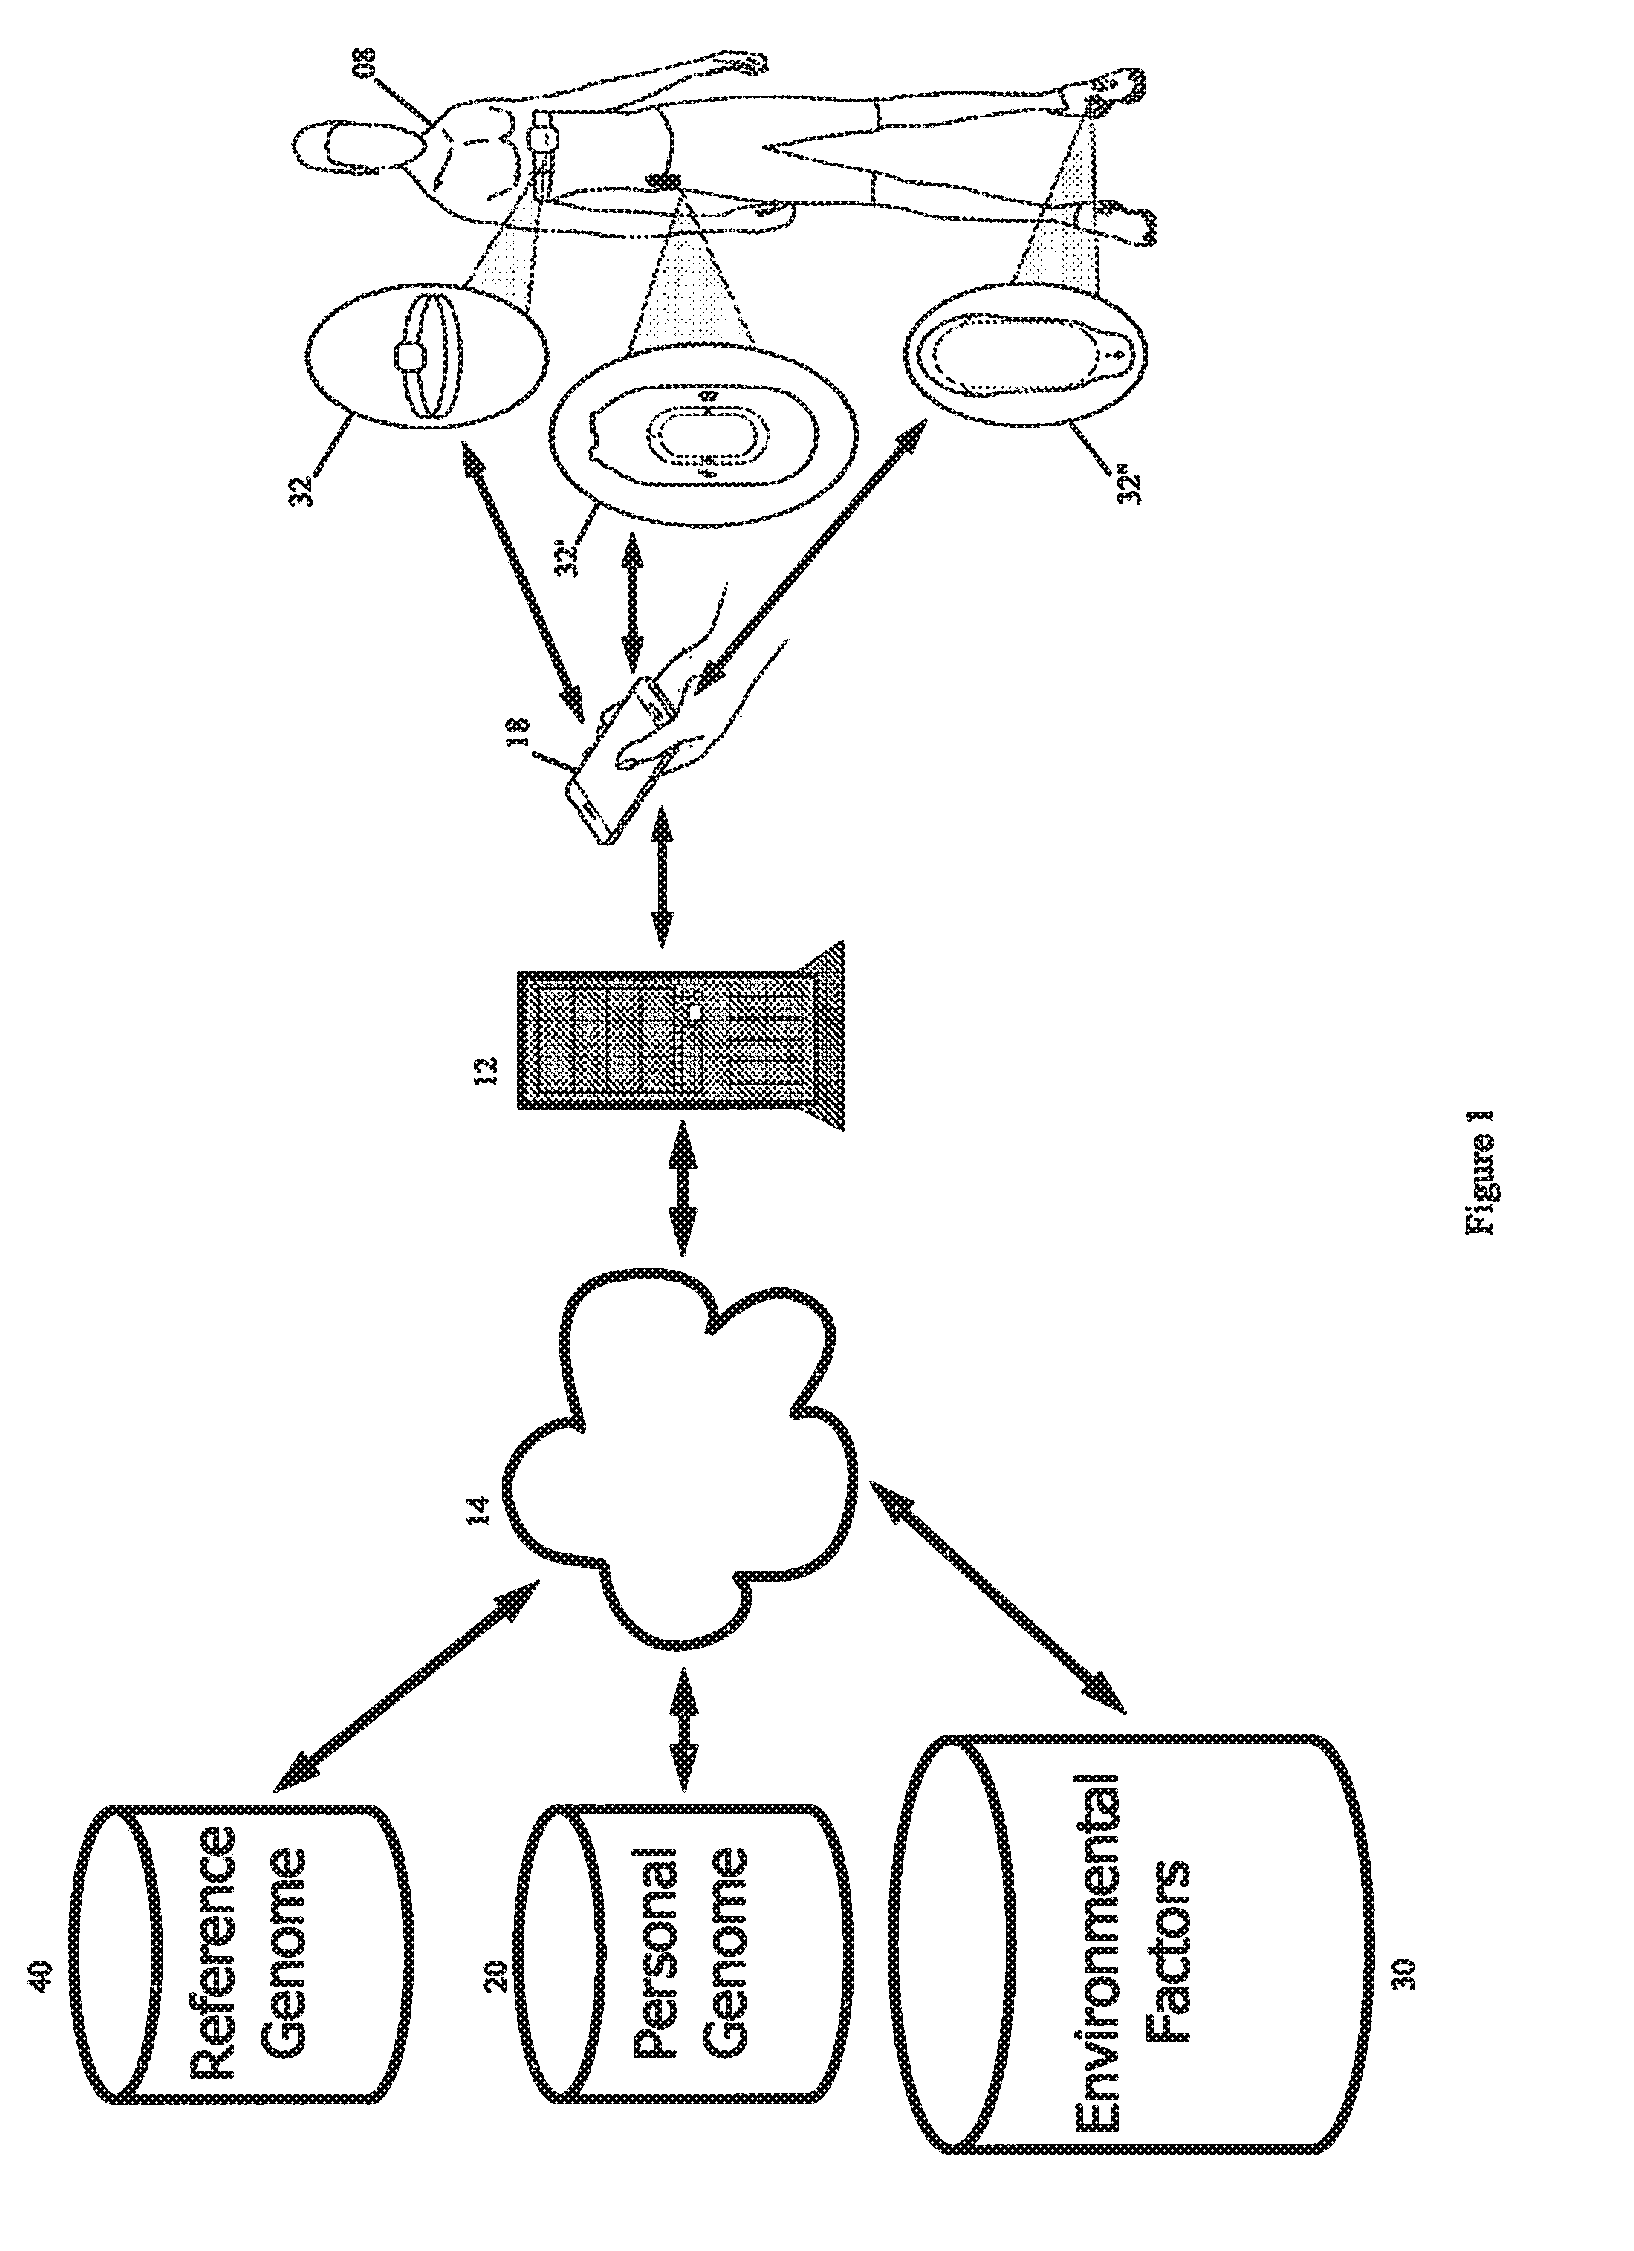 System and method for real-time personalization utilizing an individual's genomic data